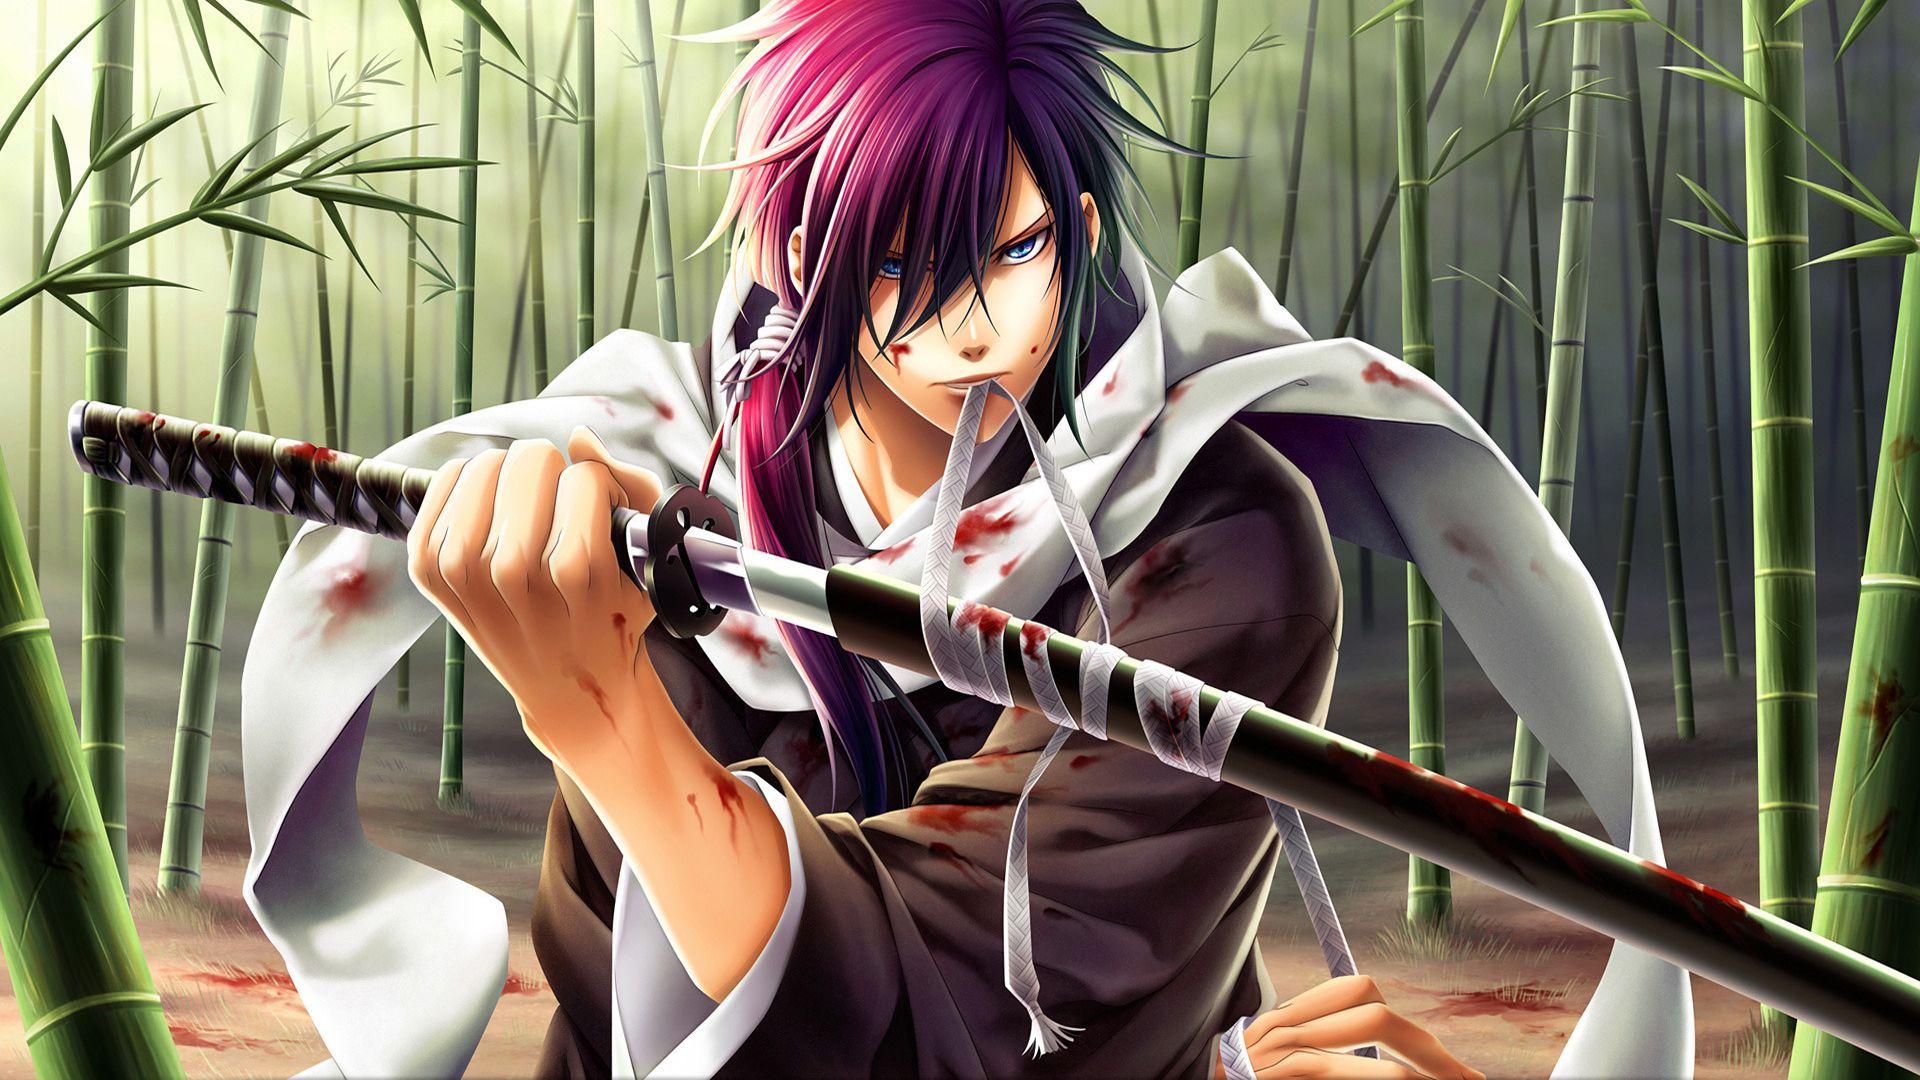 Anime Sword Wallpapers - Top Free Anime Sword Backgrounds ...